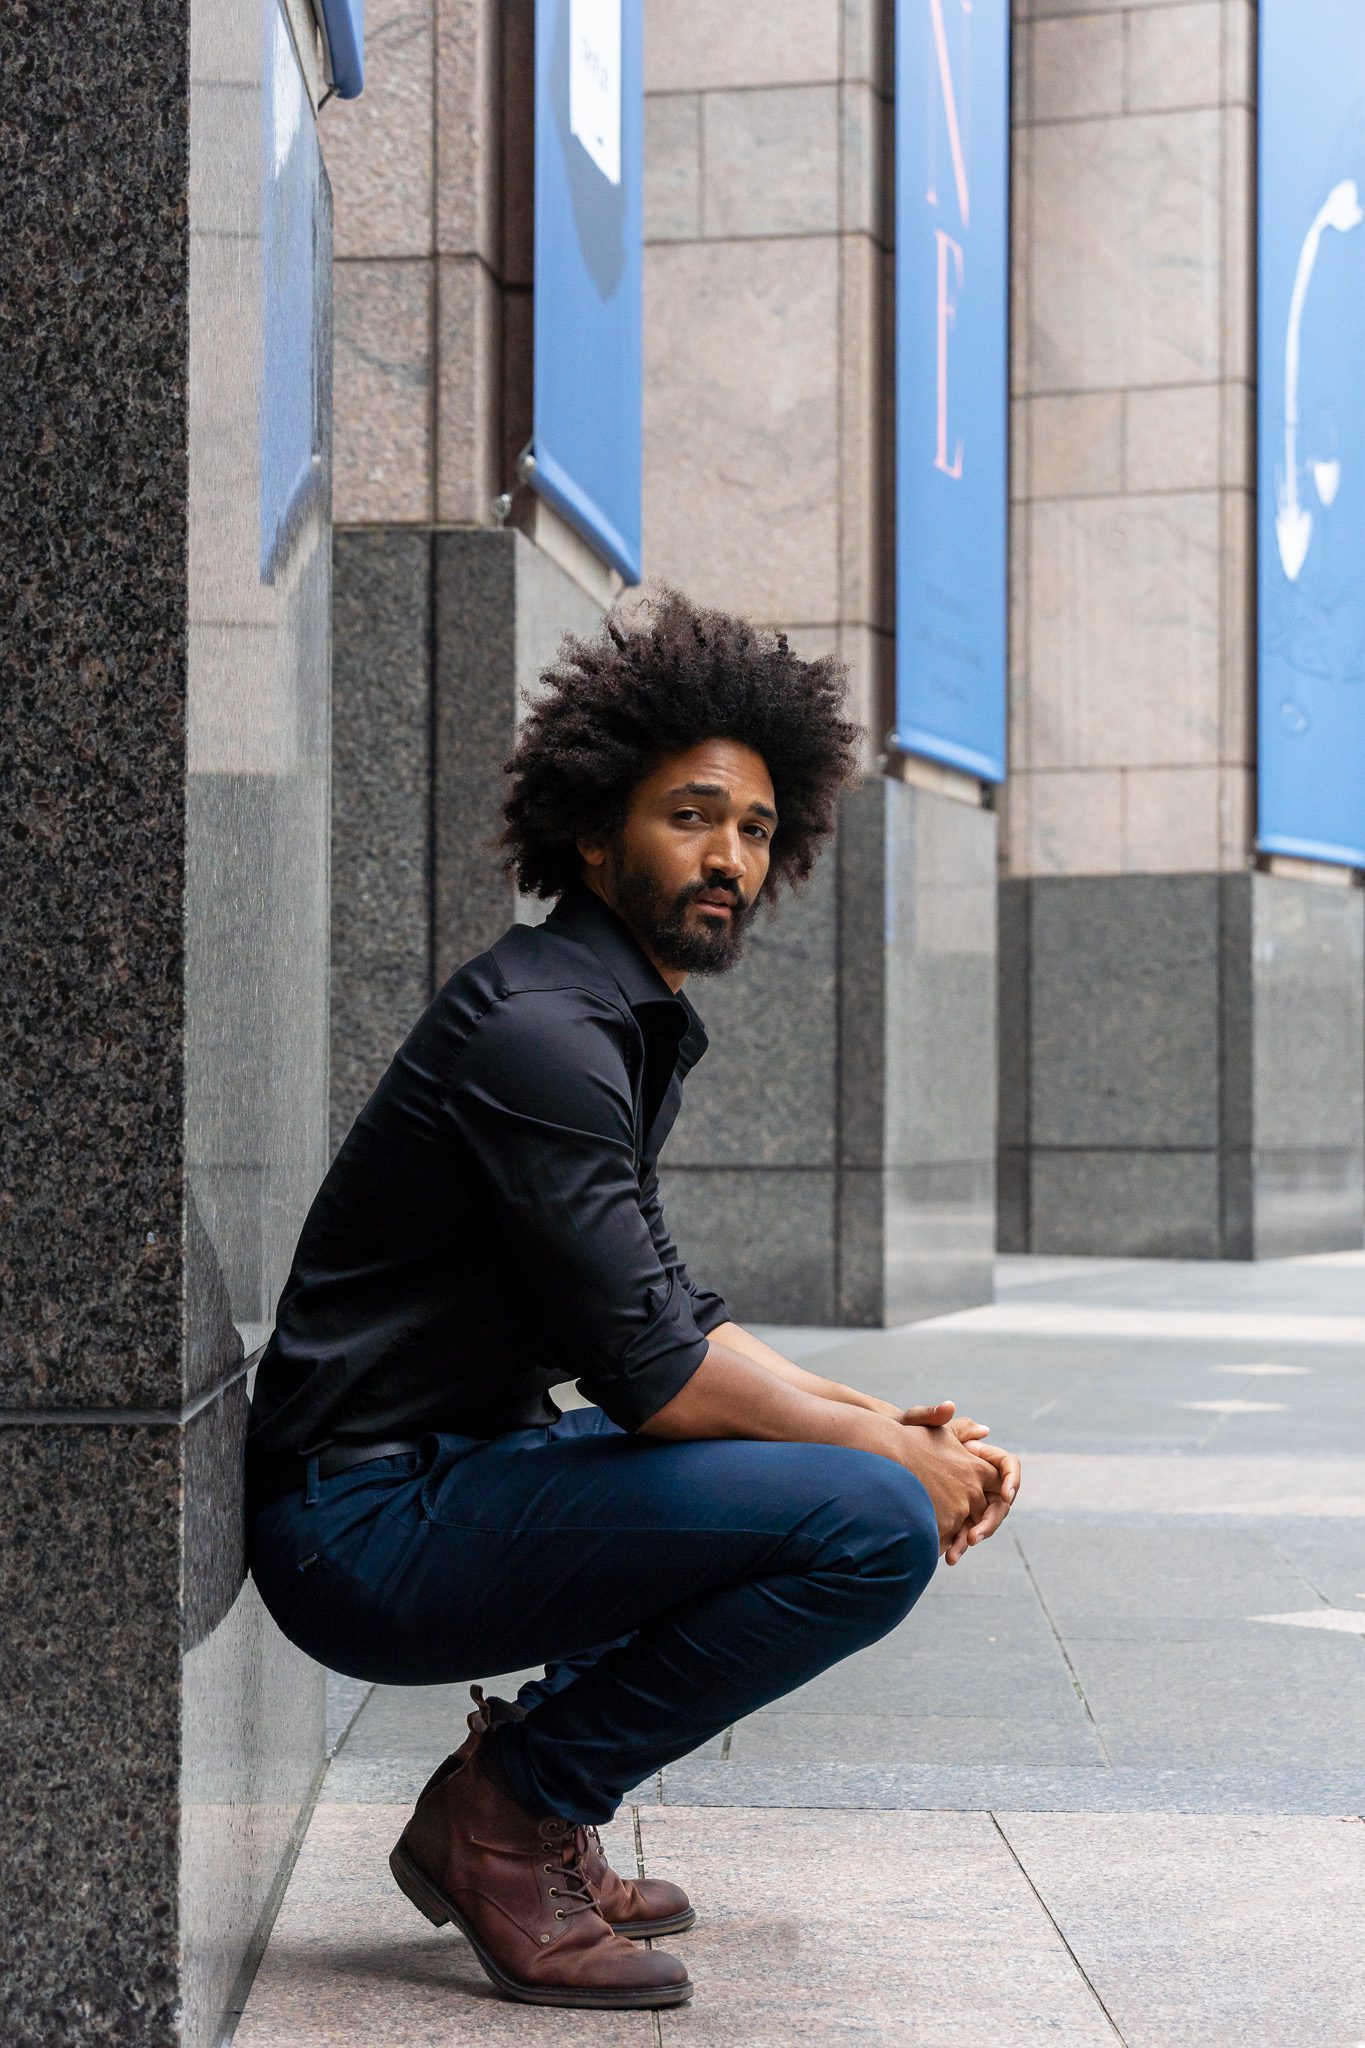 black male model crouching down next to a building pillar looking straight at the camera he is wearing black while he is photographed for the model portfolios page